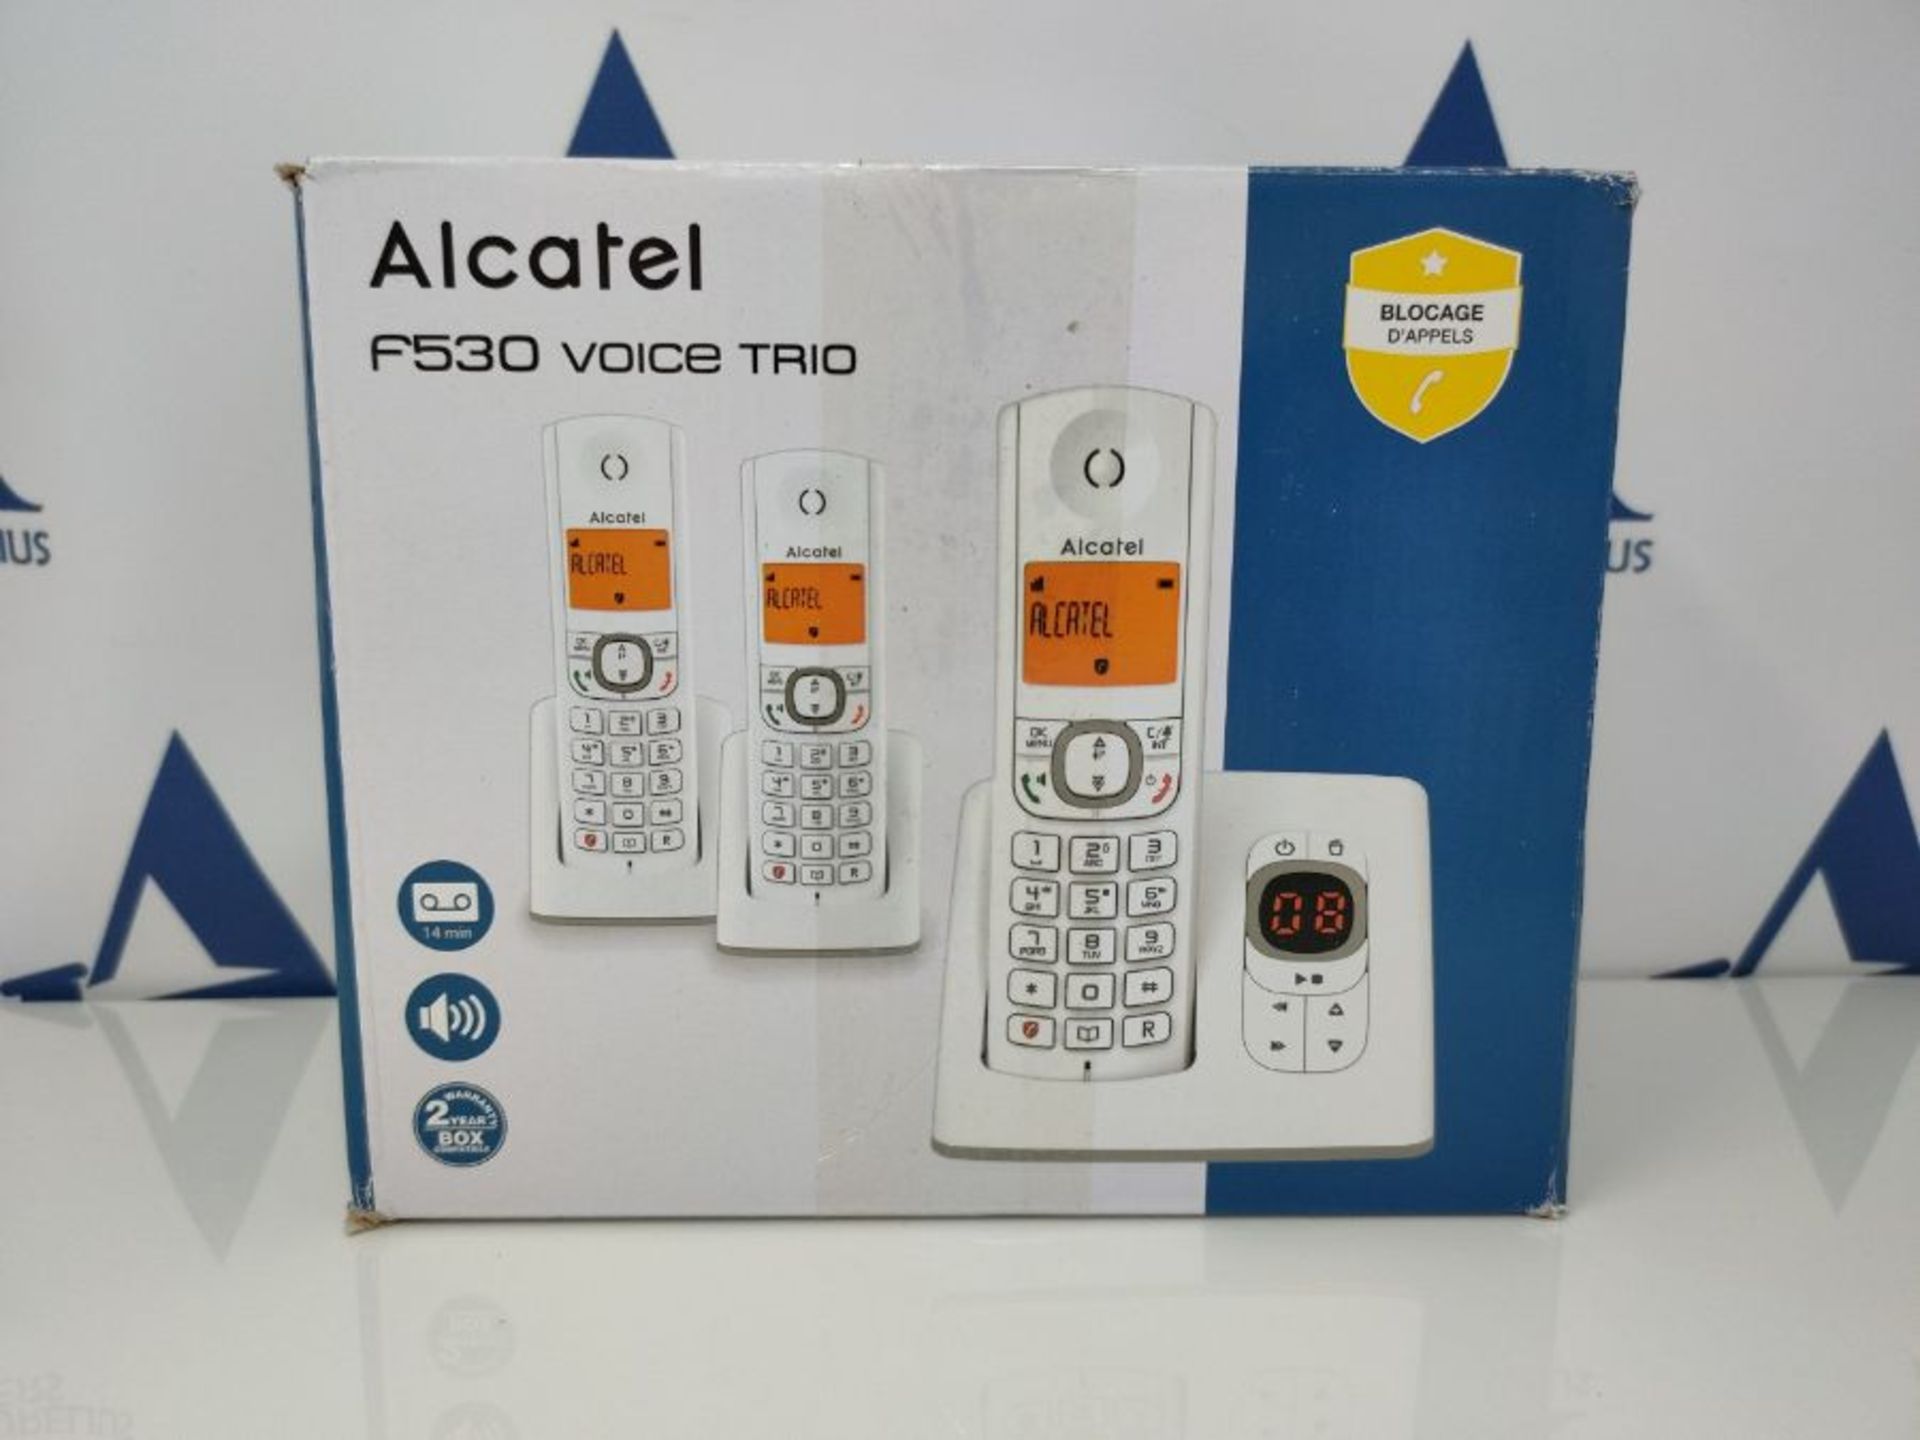 RRP £73.00 Alcatel F530 Voice TRIO Candy-Bar - Image 2 of 3